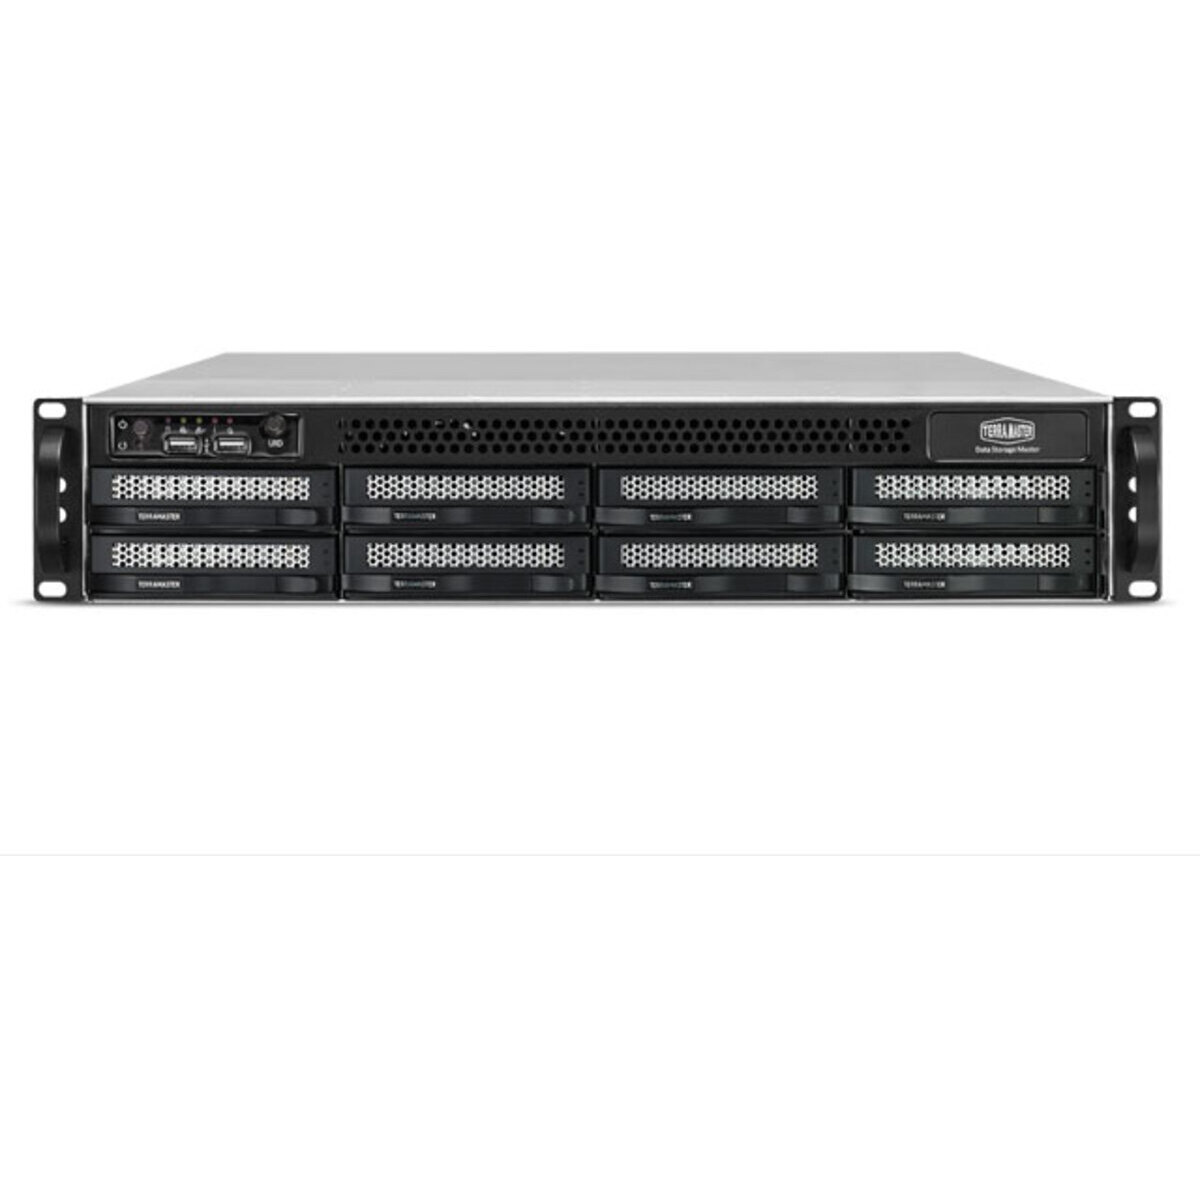 TerraMaster U8-522-9400 80tb 8-Bay RackMount Large Business / Enterprise NAS - Network Attached Storage Device 8x10tb Western Digital Red Plus WD101EFBX 3.5 7200rpm SATA 6Gb/s HDD NAS Class Drives Installed - Burn-In Tested U8-522-9400